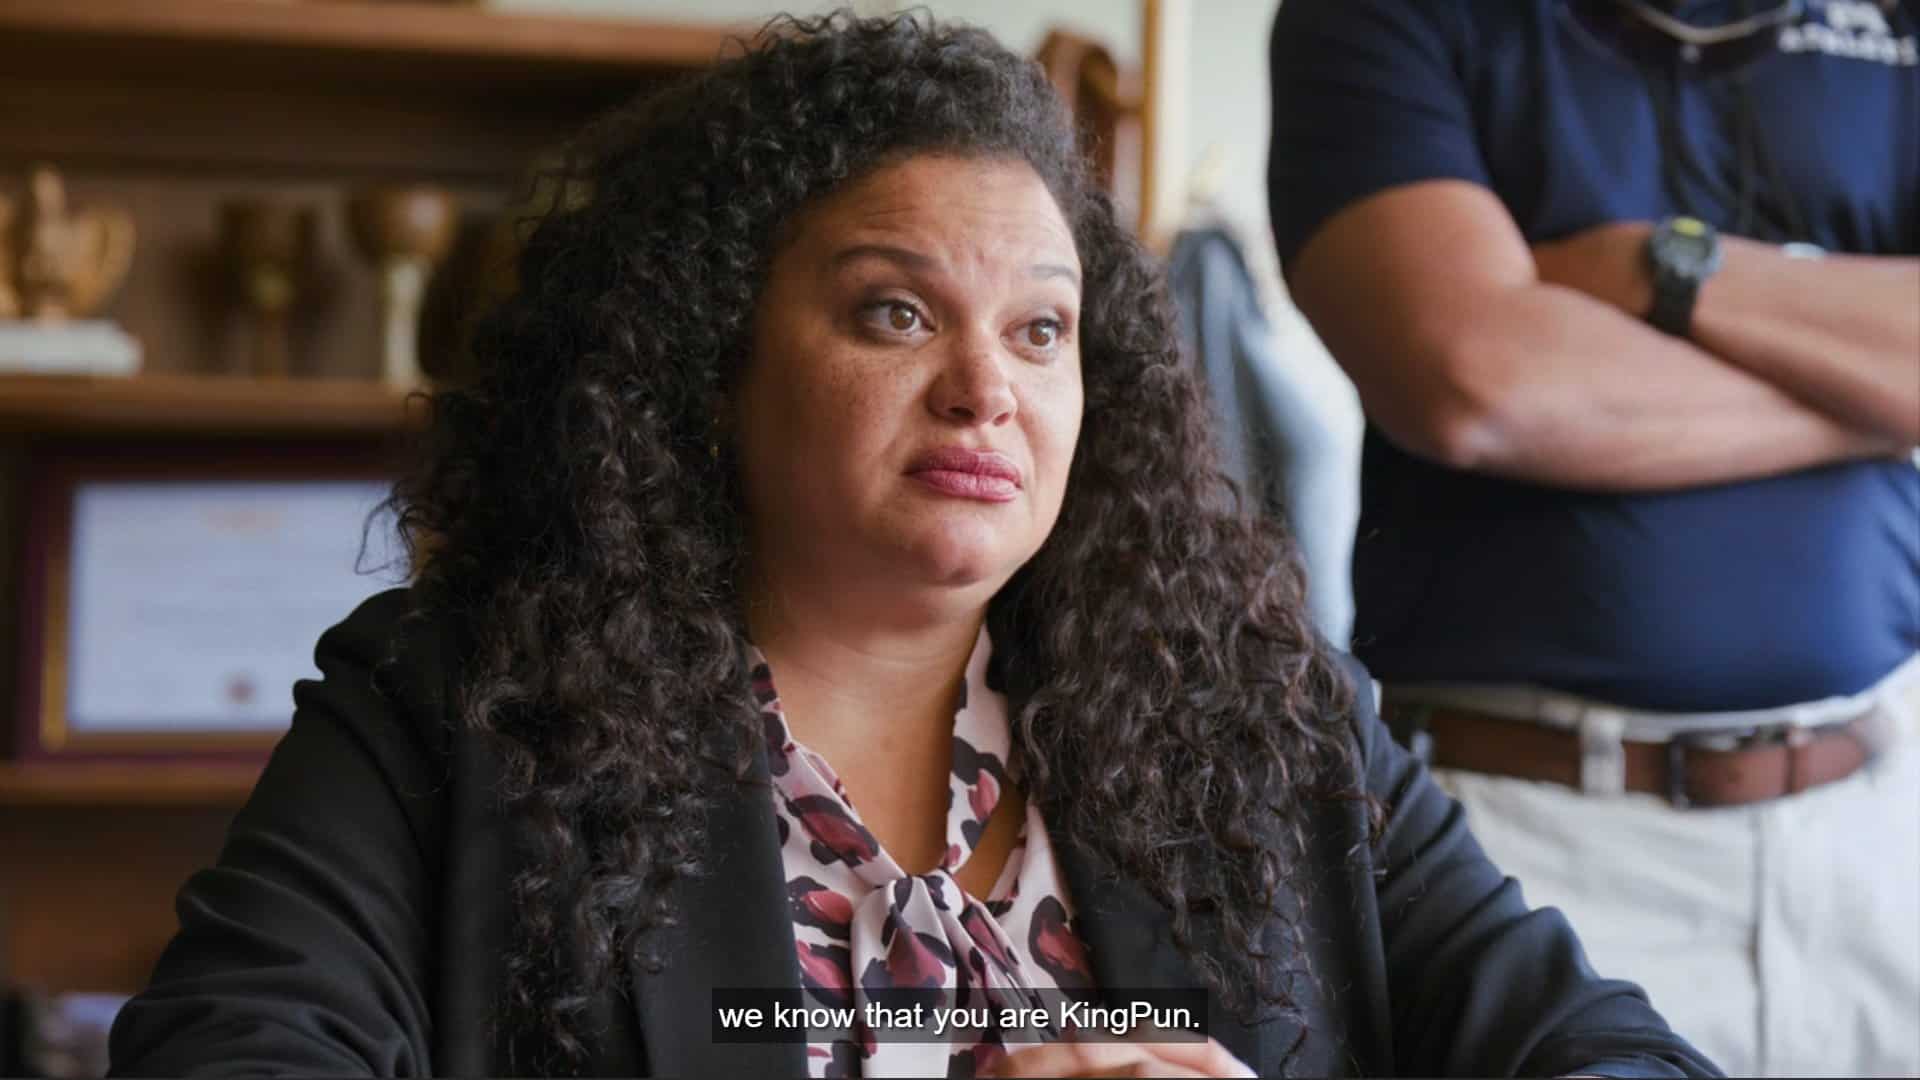 Principal Collins (Michelle Buteau) saying they know Paige is KingPun